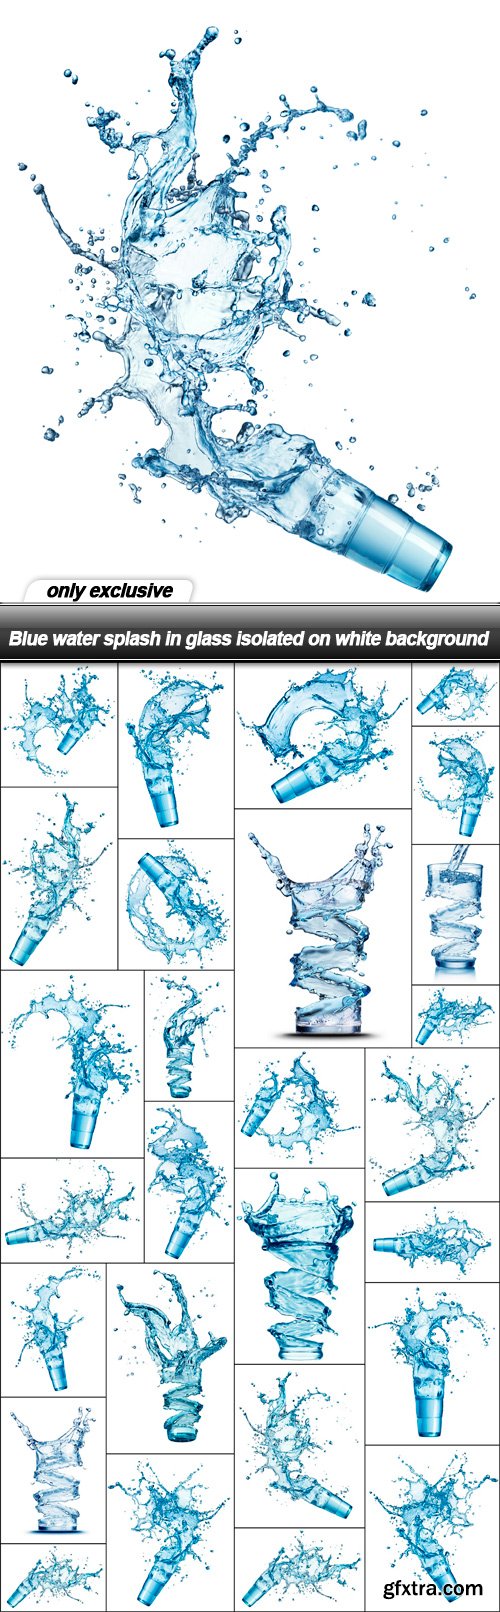 Blue water splash in glass isolated on white background - 27 UHQ JPEG